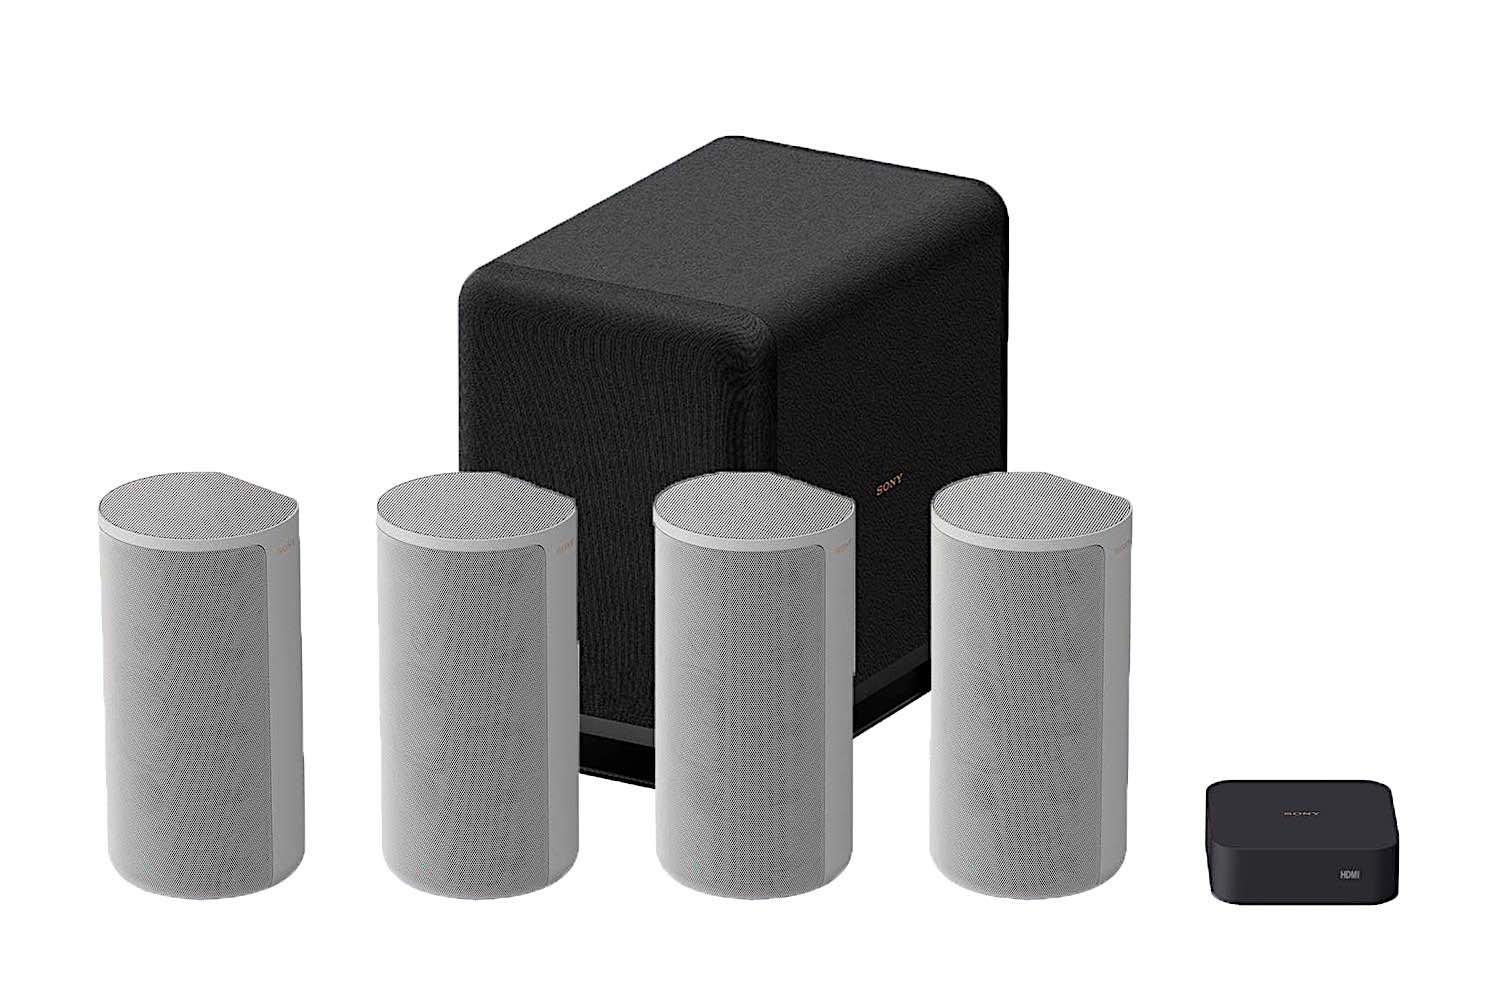 /upload/images/product/produkt_galerie/Sony_HT_A9_Dolby_Atmos_Home_Entertainment_Set_mit-Subwoofer.jpg